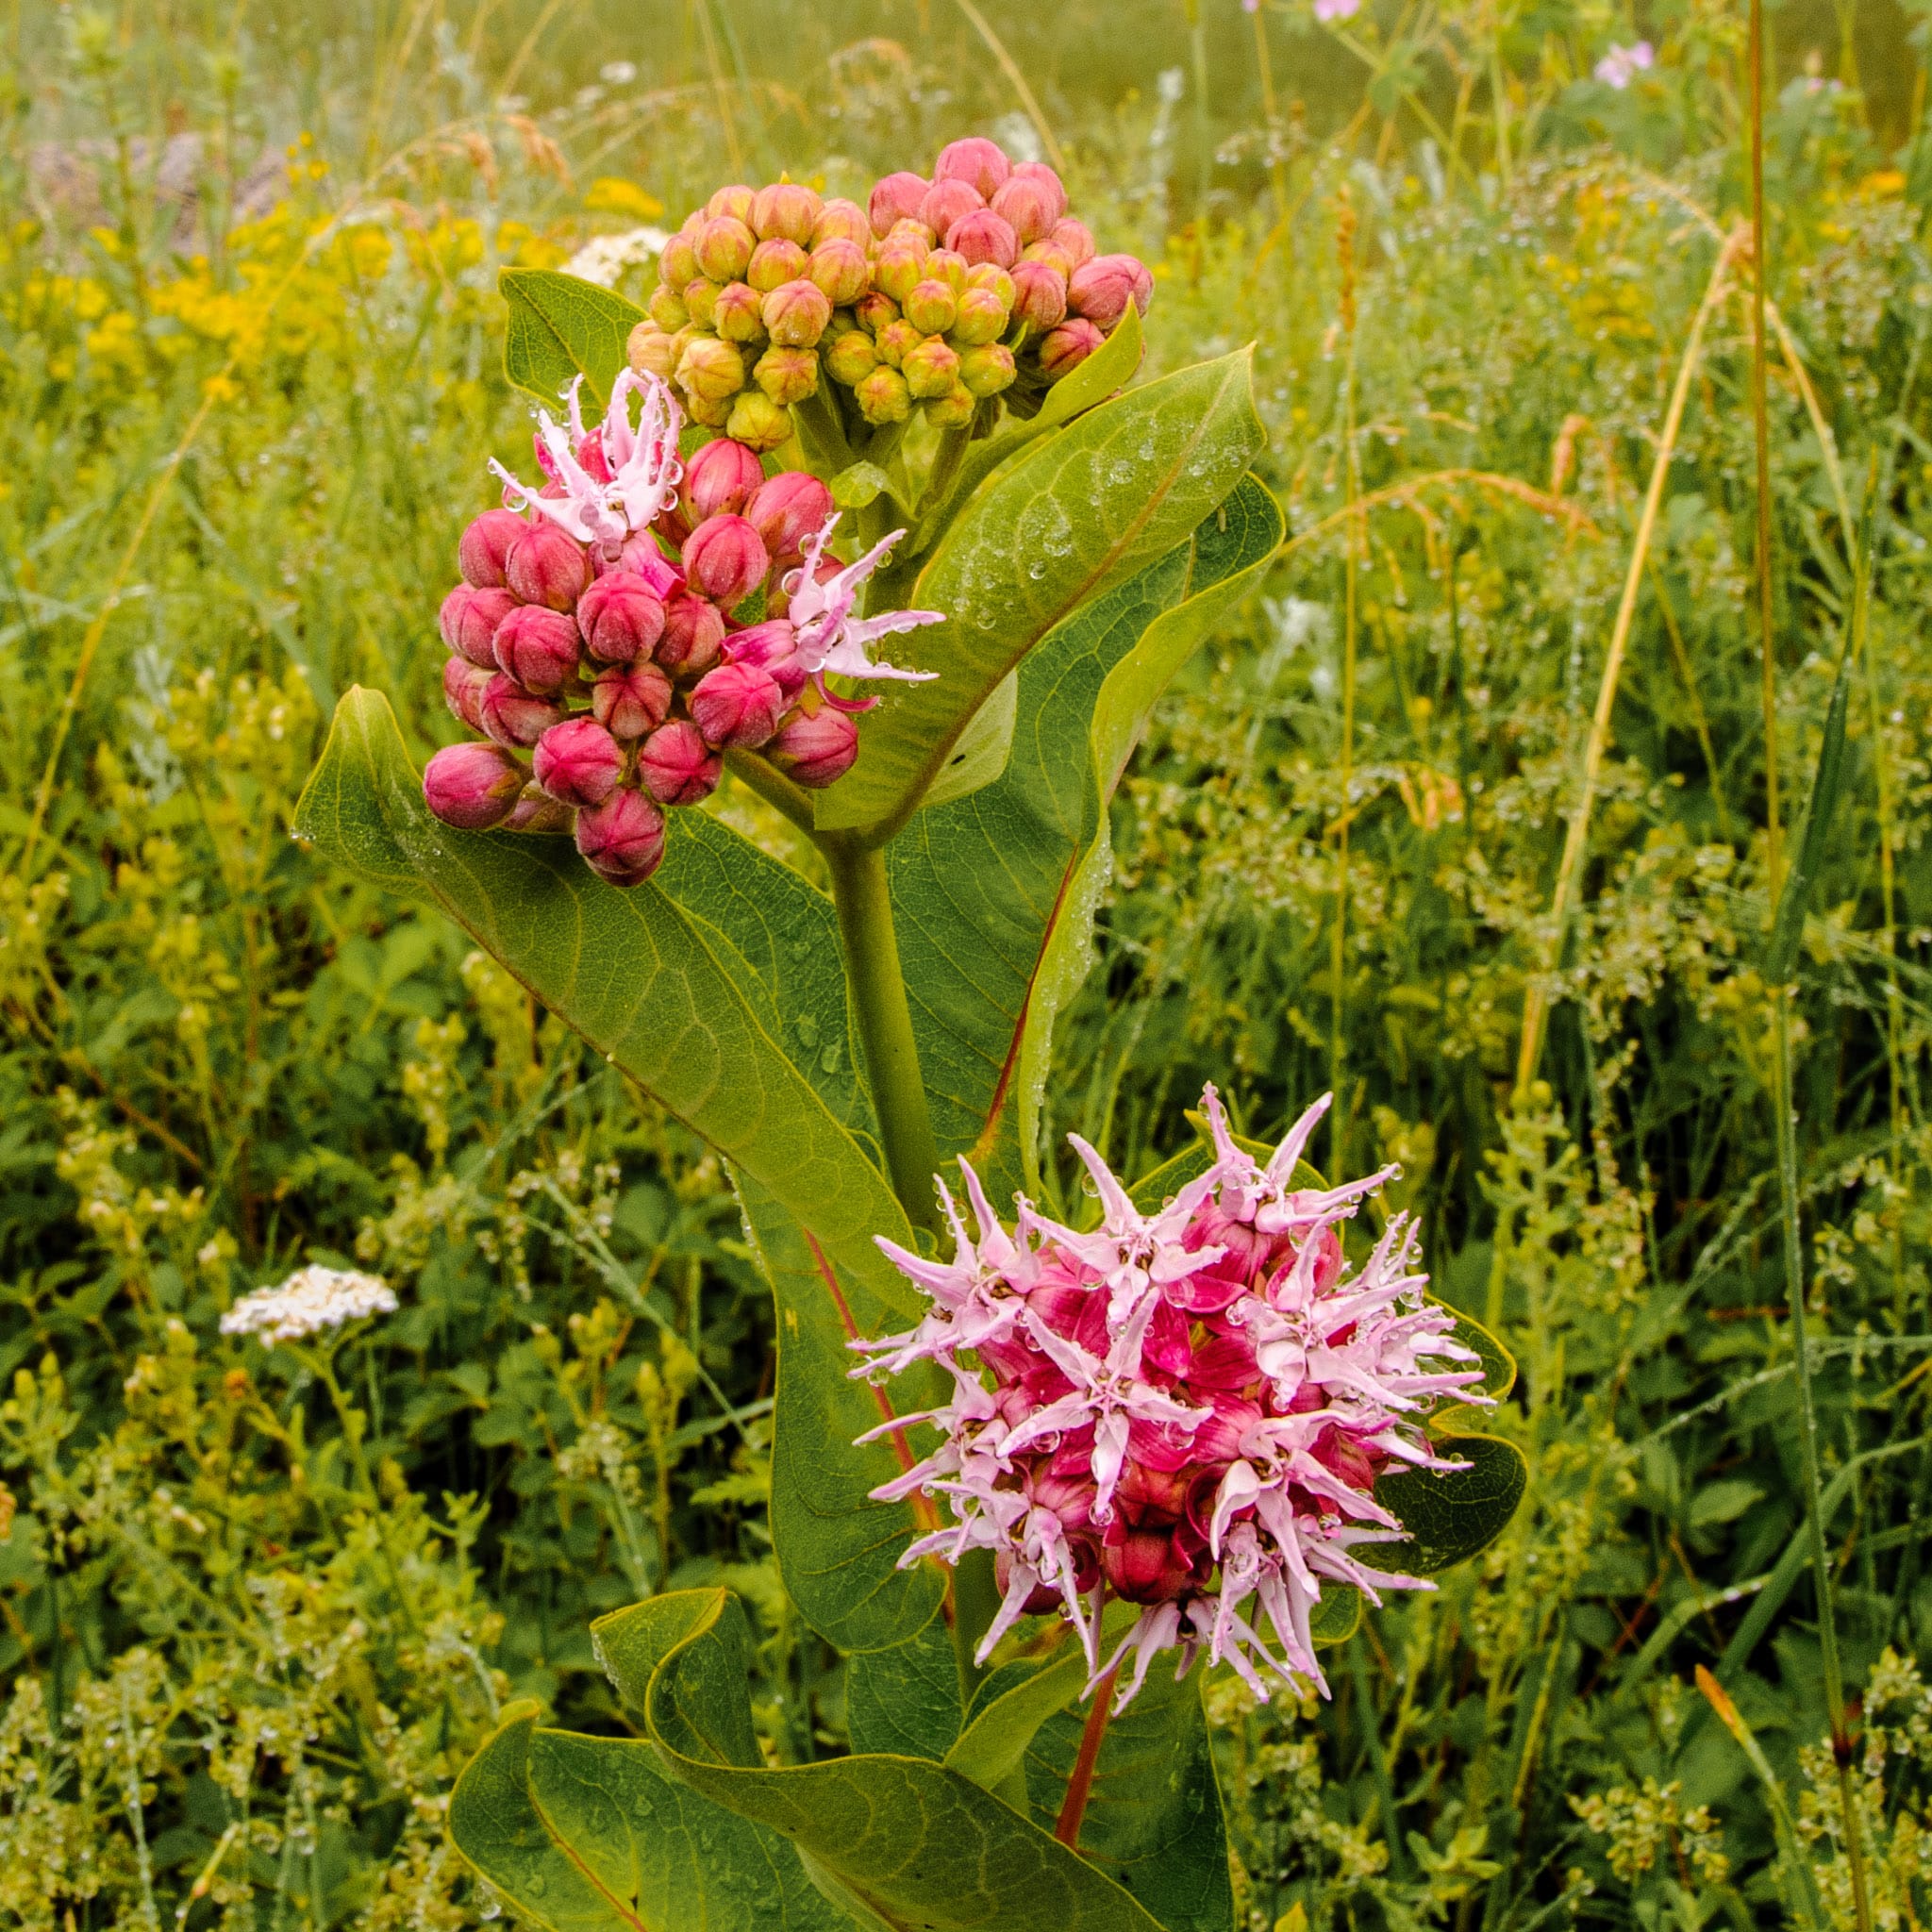 This blooming Swamp Milkweed, or Asclepias Incarnata, grows in a wet area on Flagstaff Mountain in Boulder, Colorado.